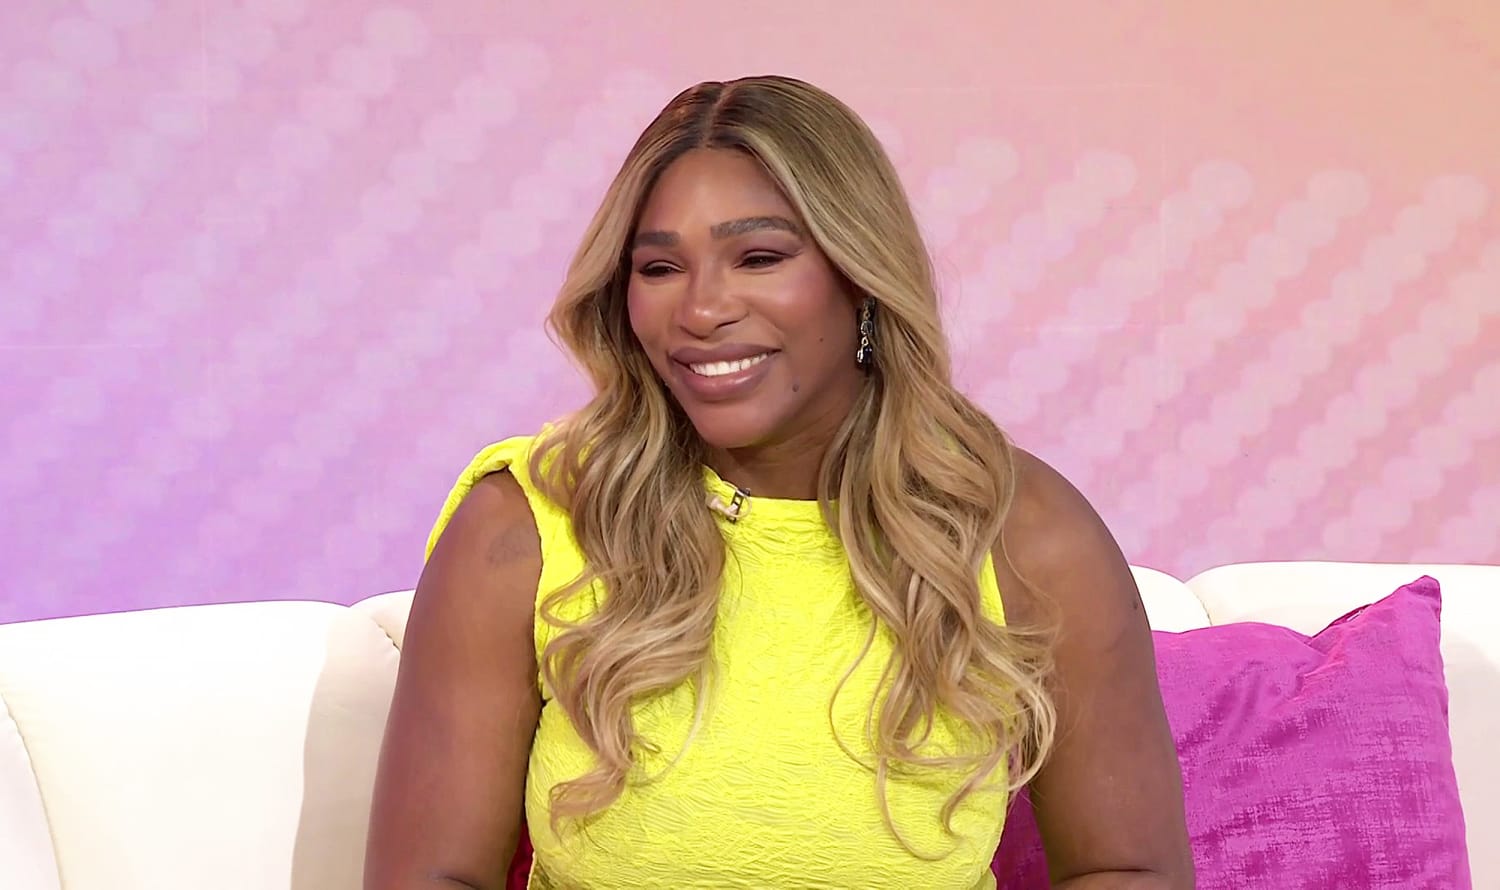 Serena Williams says she's 'way more active' as a mom than she was playing tennis